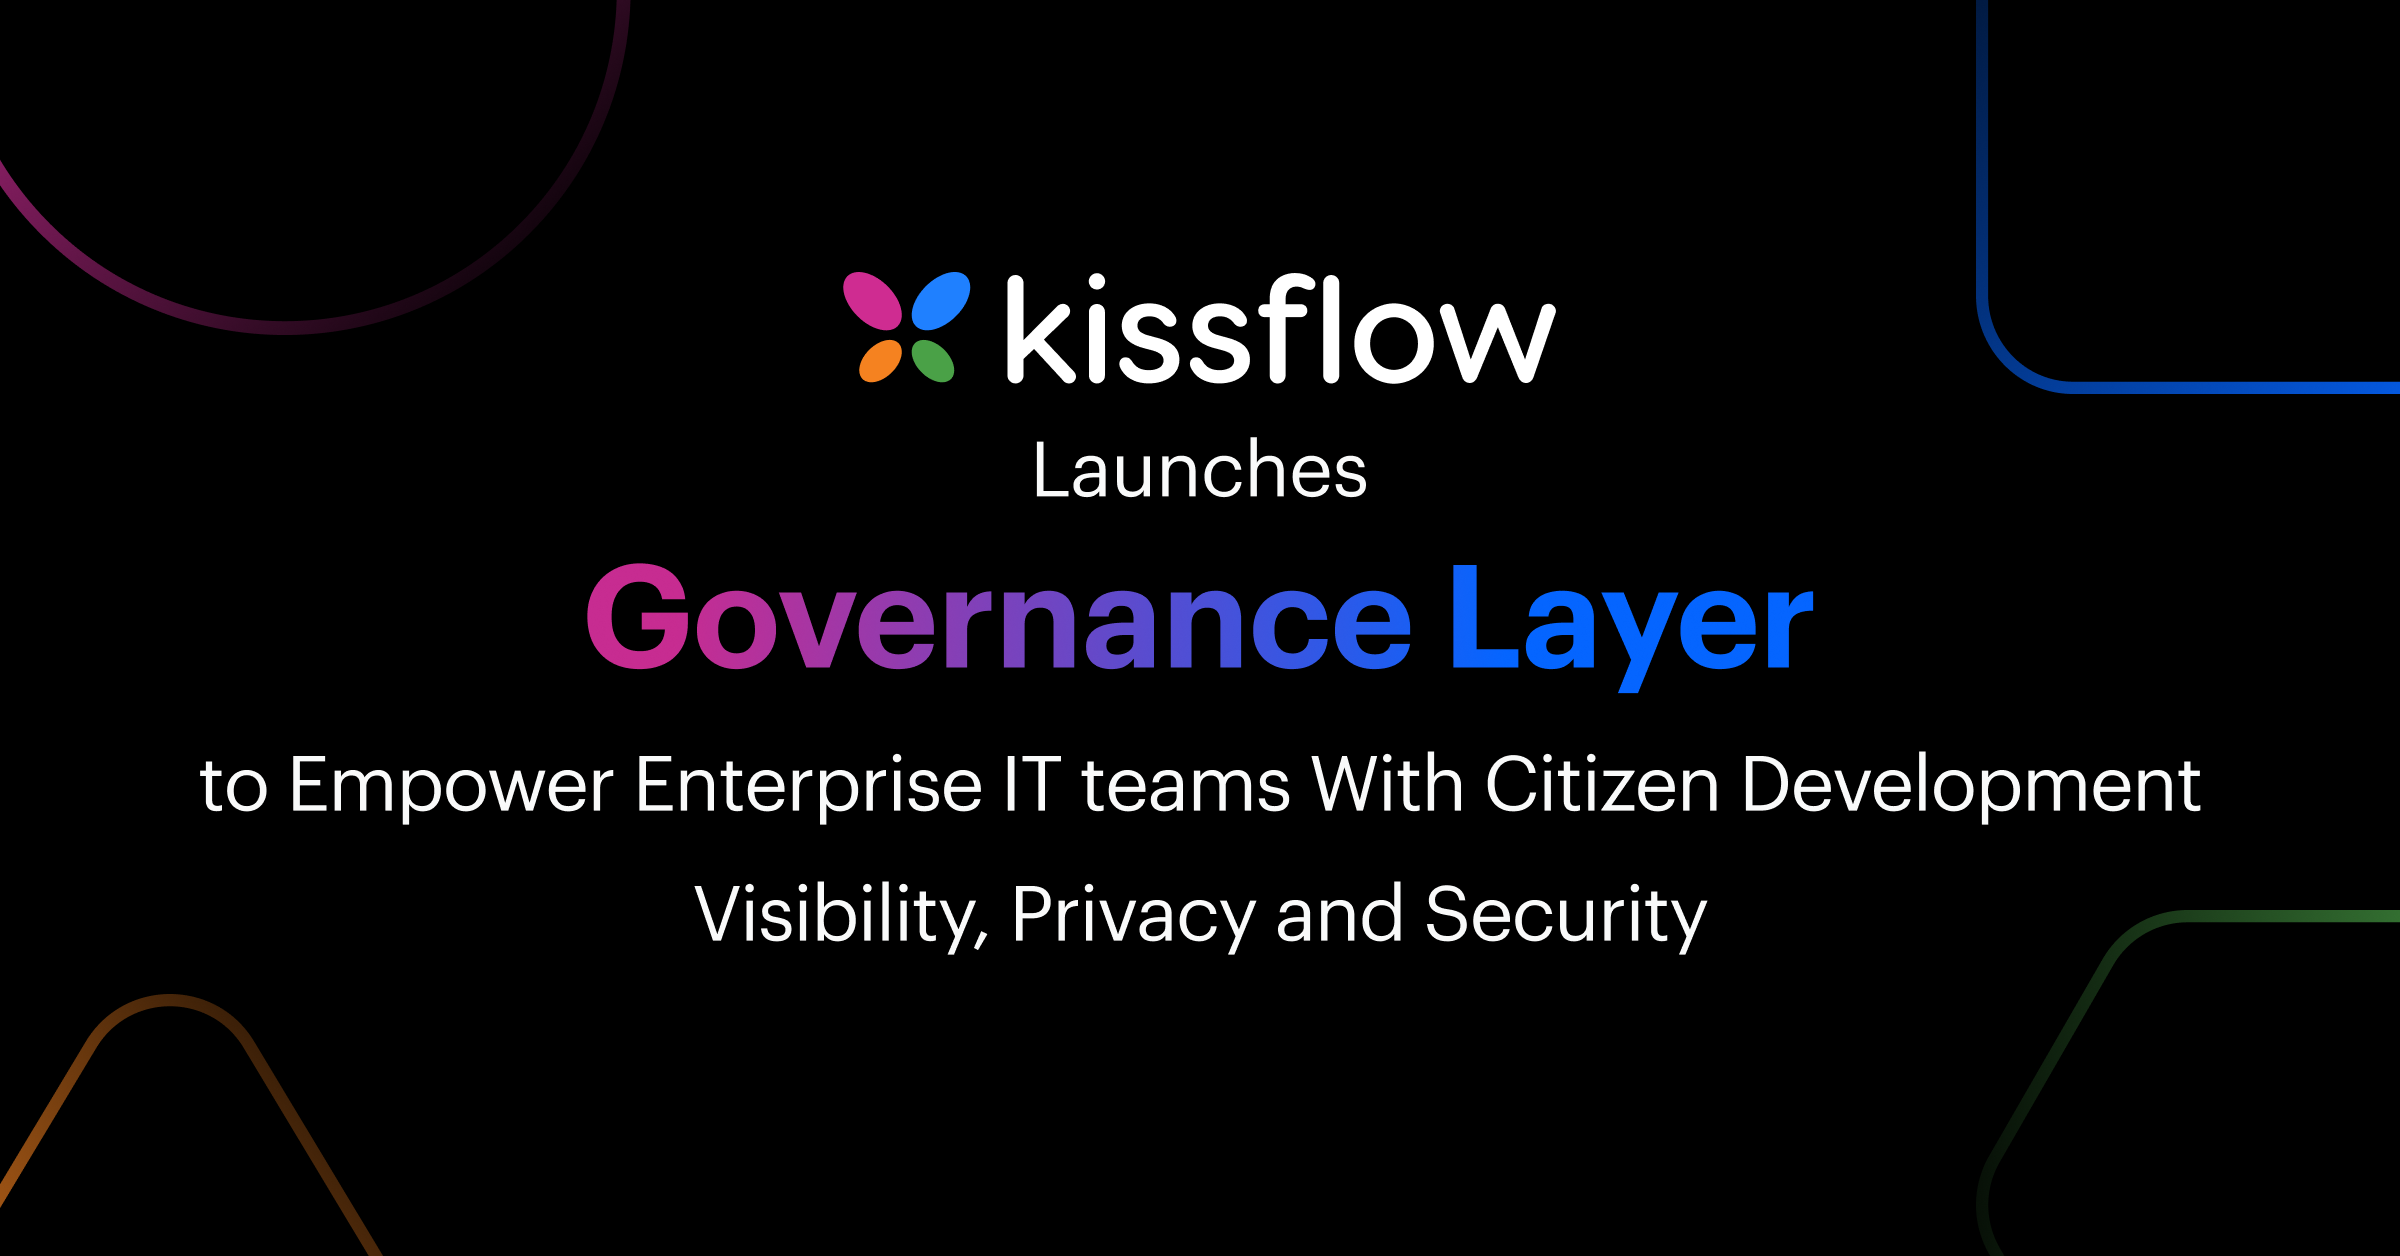 Kissflow Launches Governance Layer to Empower Enterprise IT teams With Citizen Development Visibility, Privacy and Security